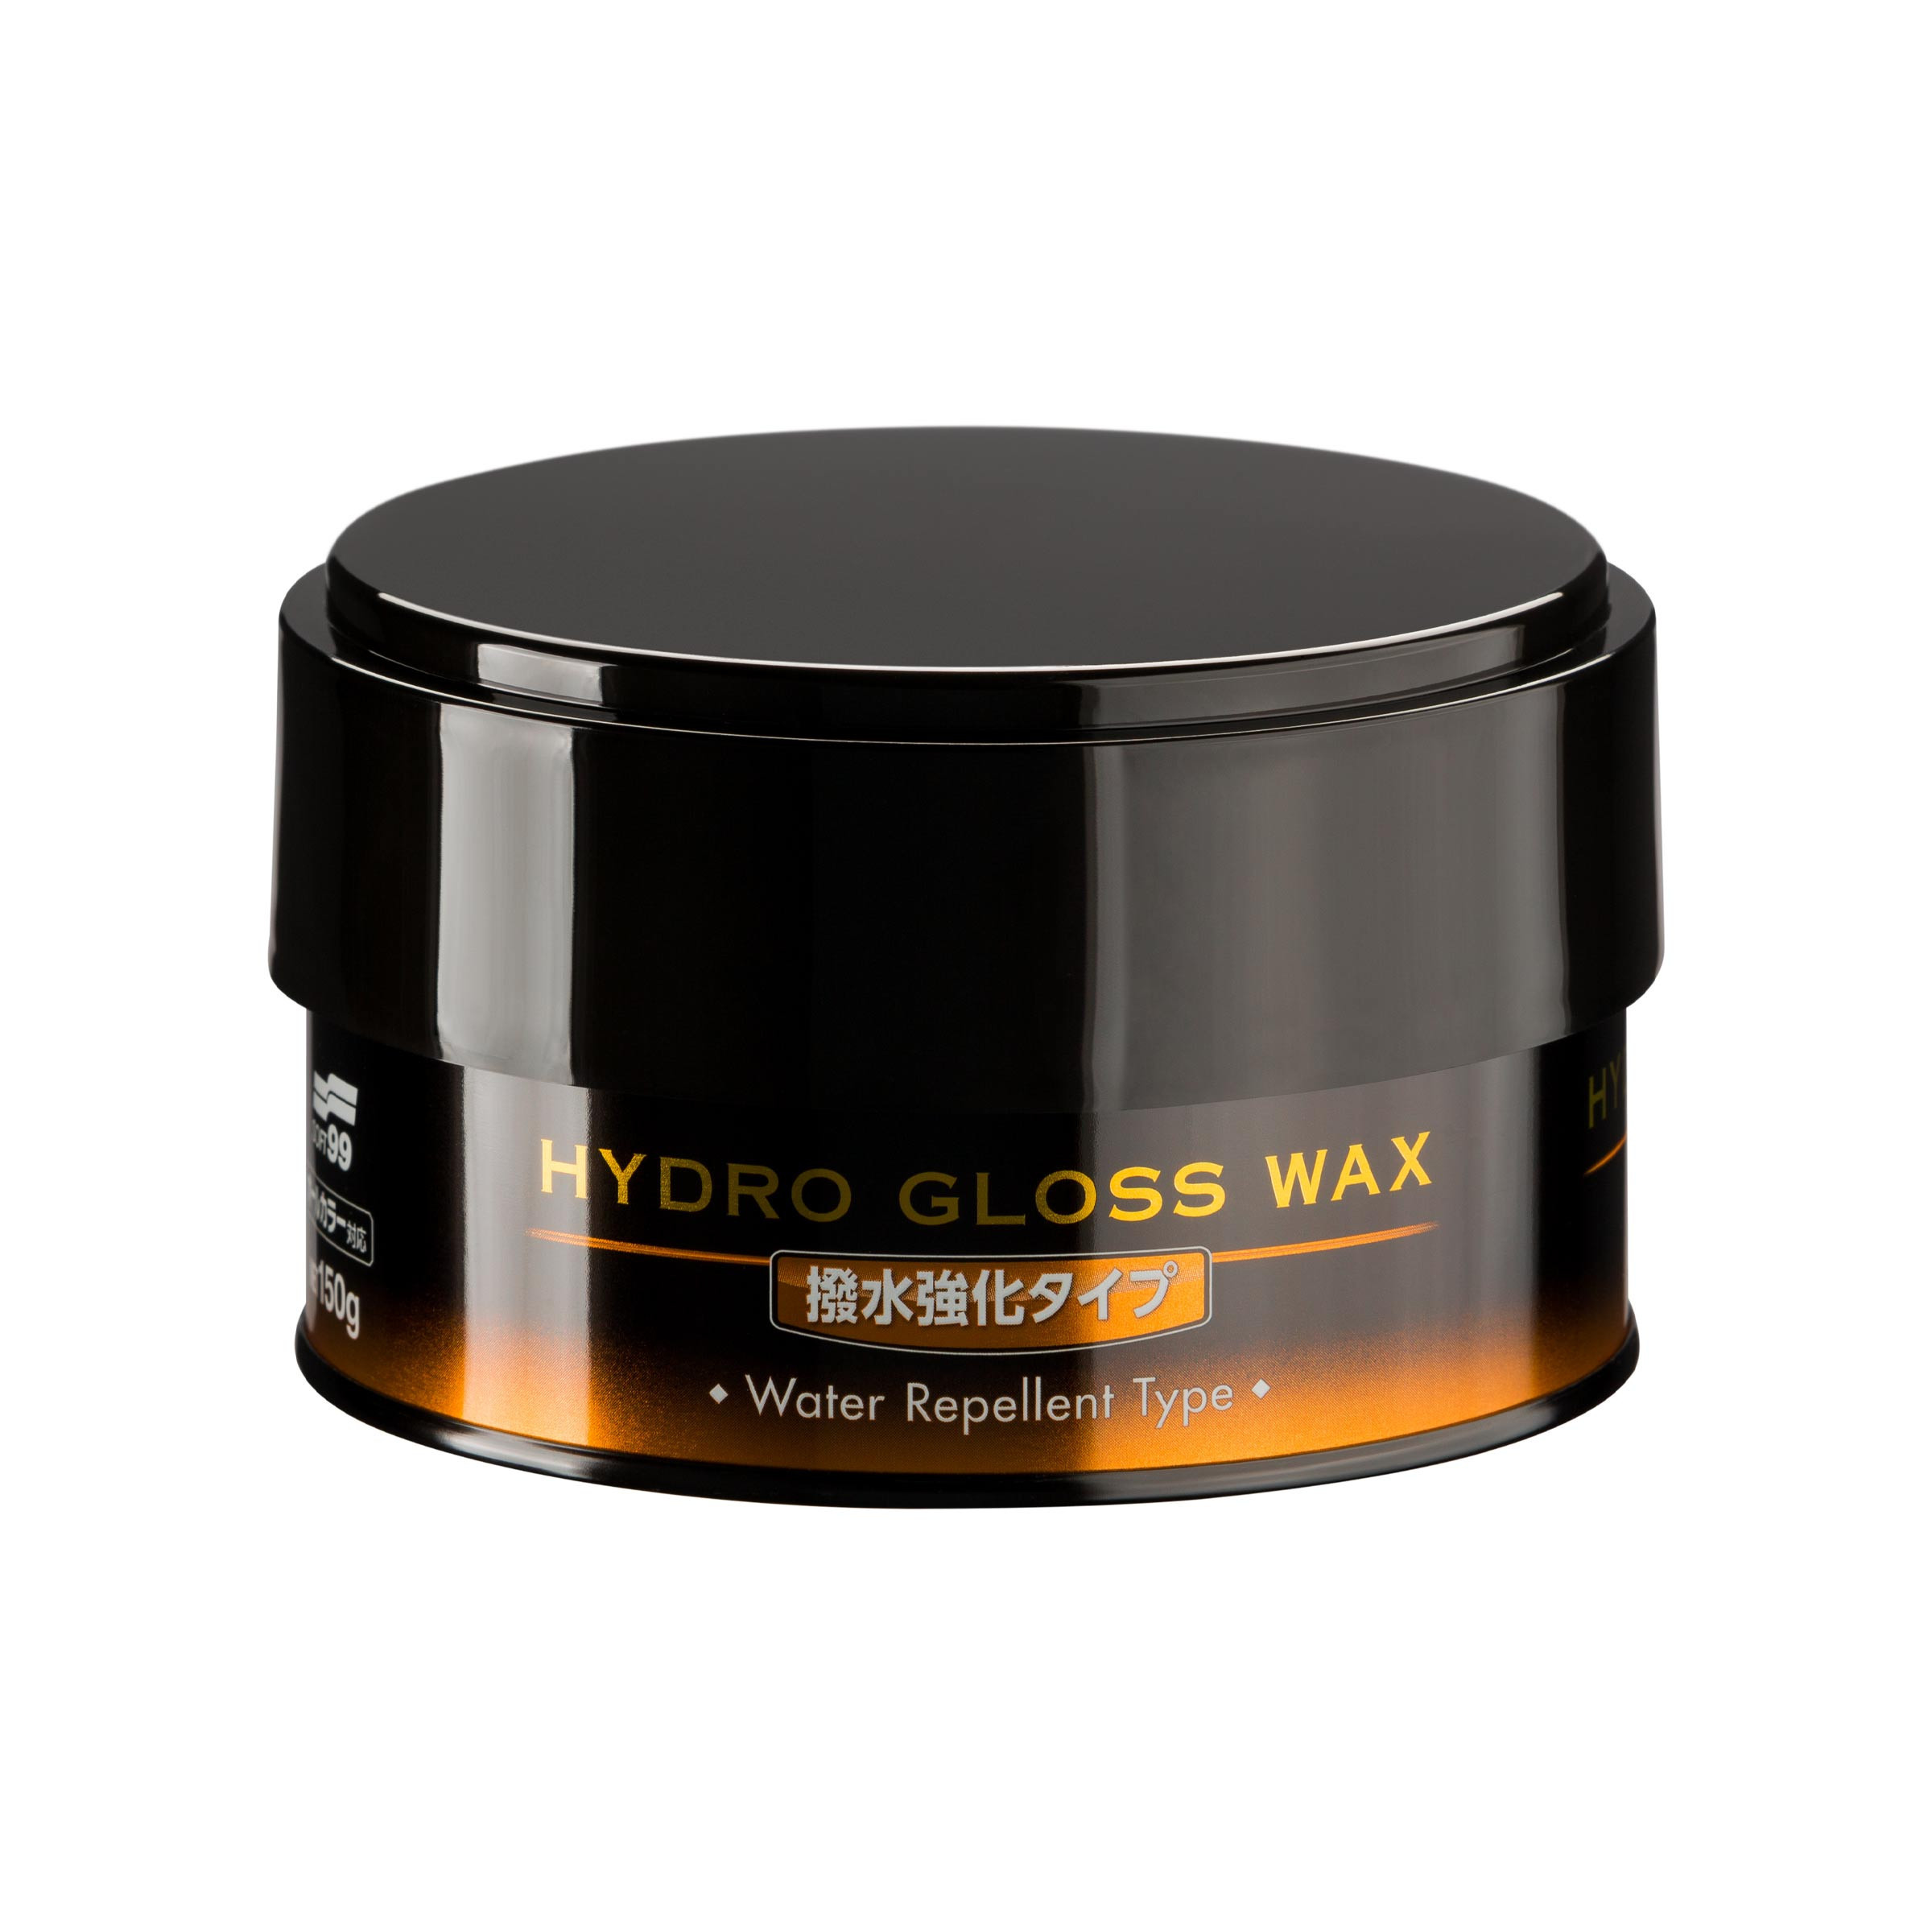 Hydro Gloss Water Repellent, soft car wax, 150 g